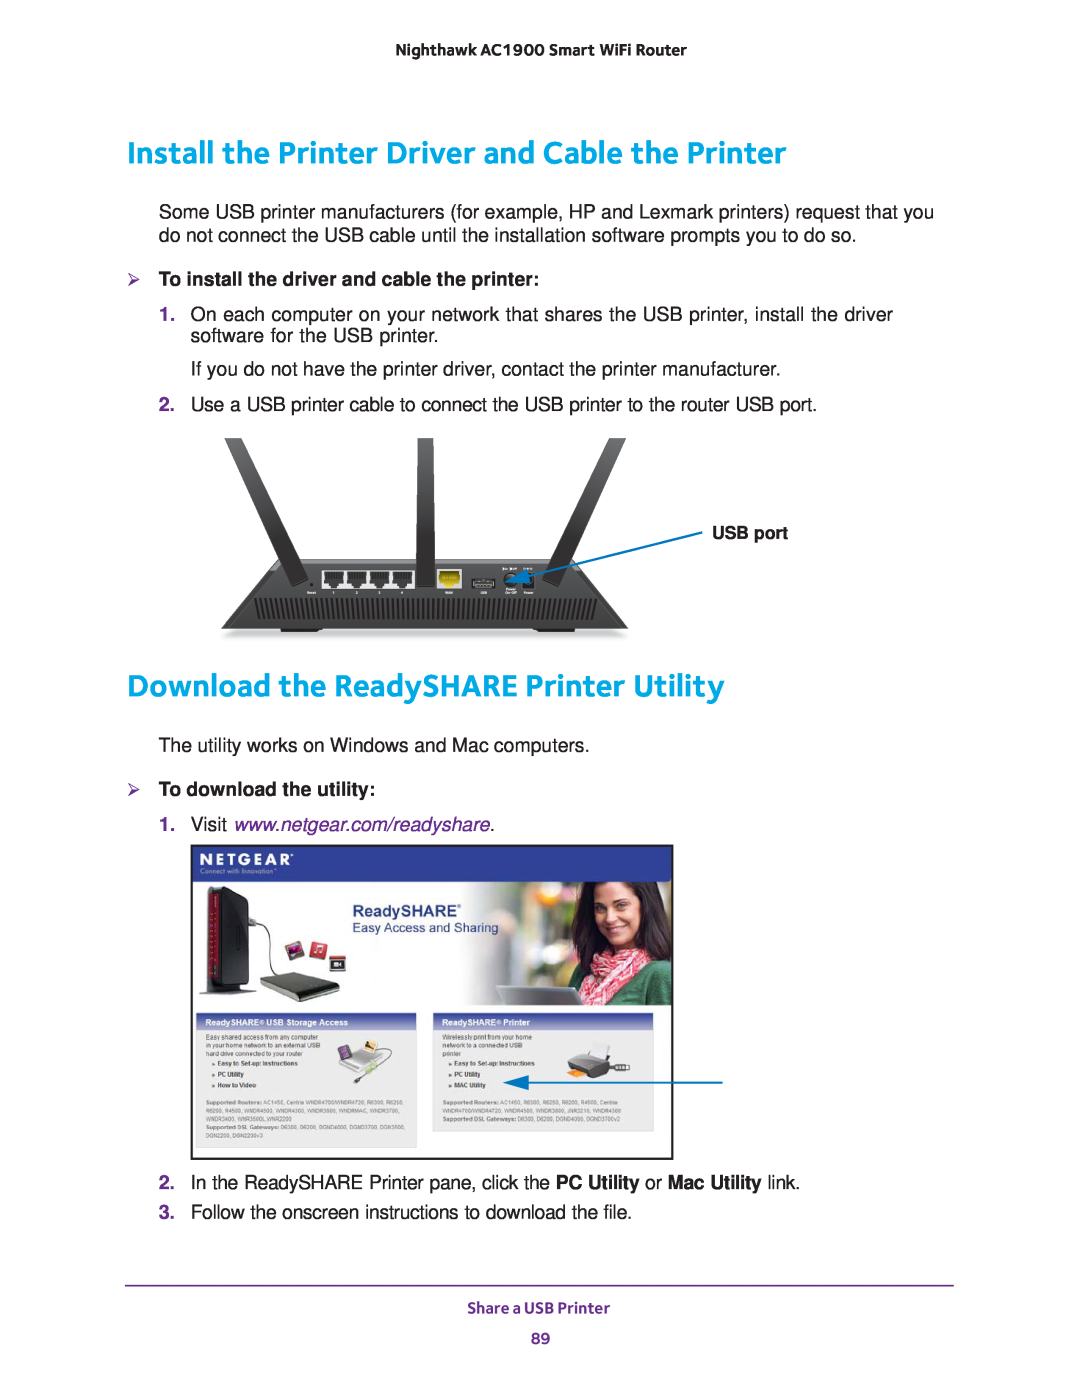 NETGEAR Model R7000 user manual Install the Printer Driver and Cable the Printer, Download the ReadySHARE Printer Utility 